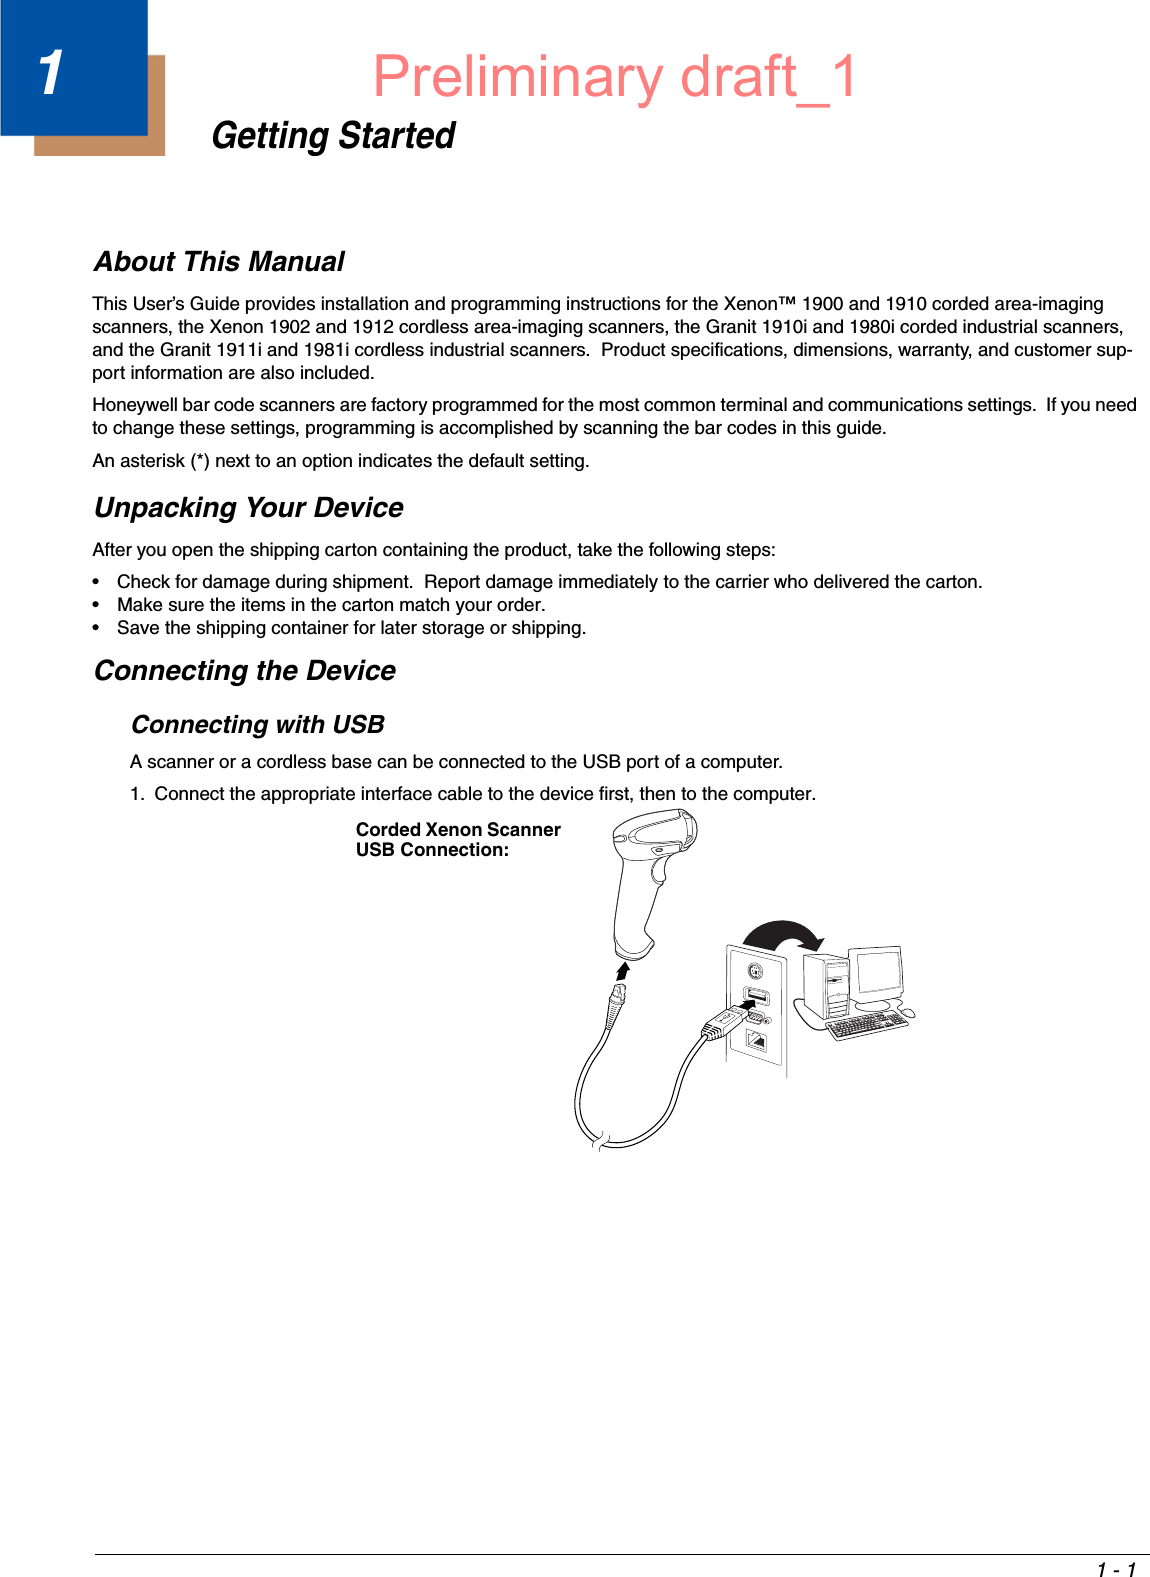 1 - 11Getting StartedAbout This ManualThis User’s Guide provides installation and programming instructions for the Xenon™ 1900 and 1910 corded area-imaging scanners, the Xenon 1902 and 1912 cordless area-imaging scanners, the Granit 1910i and 1980i corded industrial scanners, and the Granit 1911i and 1981i cordless industrial scanners.  Product specifications, dimensions, warranty, and customer sup-port information are also included.Honeywell bar code scanners are factory programmed for the most common terminal and communications settings.  If you need to change these settings, programming is accomplished by scanning the bar codes in this guide.An asterisk (*) next to an option indicates the default setting.Unpacking Your DeviceAfter you open the shipping carton containing the product, take the following steps:• Check for damage during shipment.  Report damage immediately to the carrier who delivered the carton.• Make sure the items in the carton match your order.• Save the shipping container for later storage or shipping.Connecting the DeviceConnecting with USBA scanner or a cordless base can be connected to the USB port of a computer. 1. Connect the appropriate interface cable to the device first, then to the computer.Corded Xenon Scanner USB Connection:Preliminary draft_1